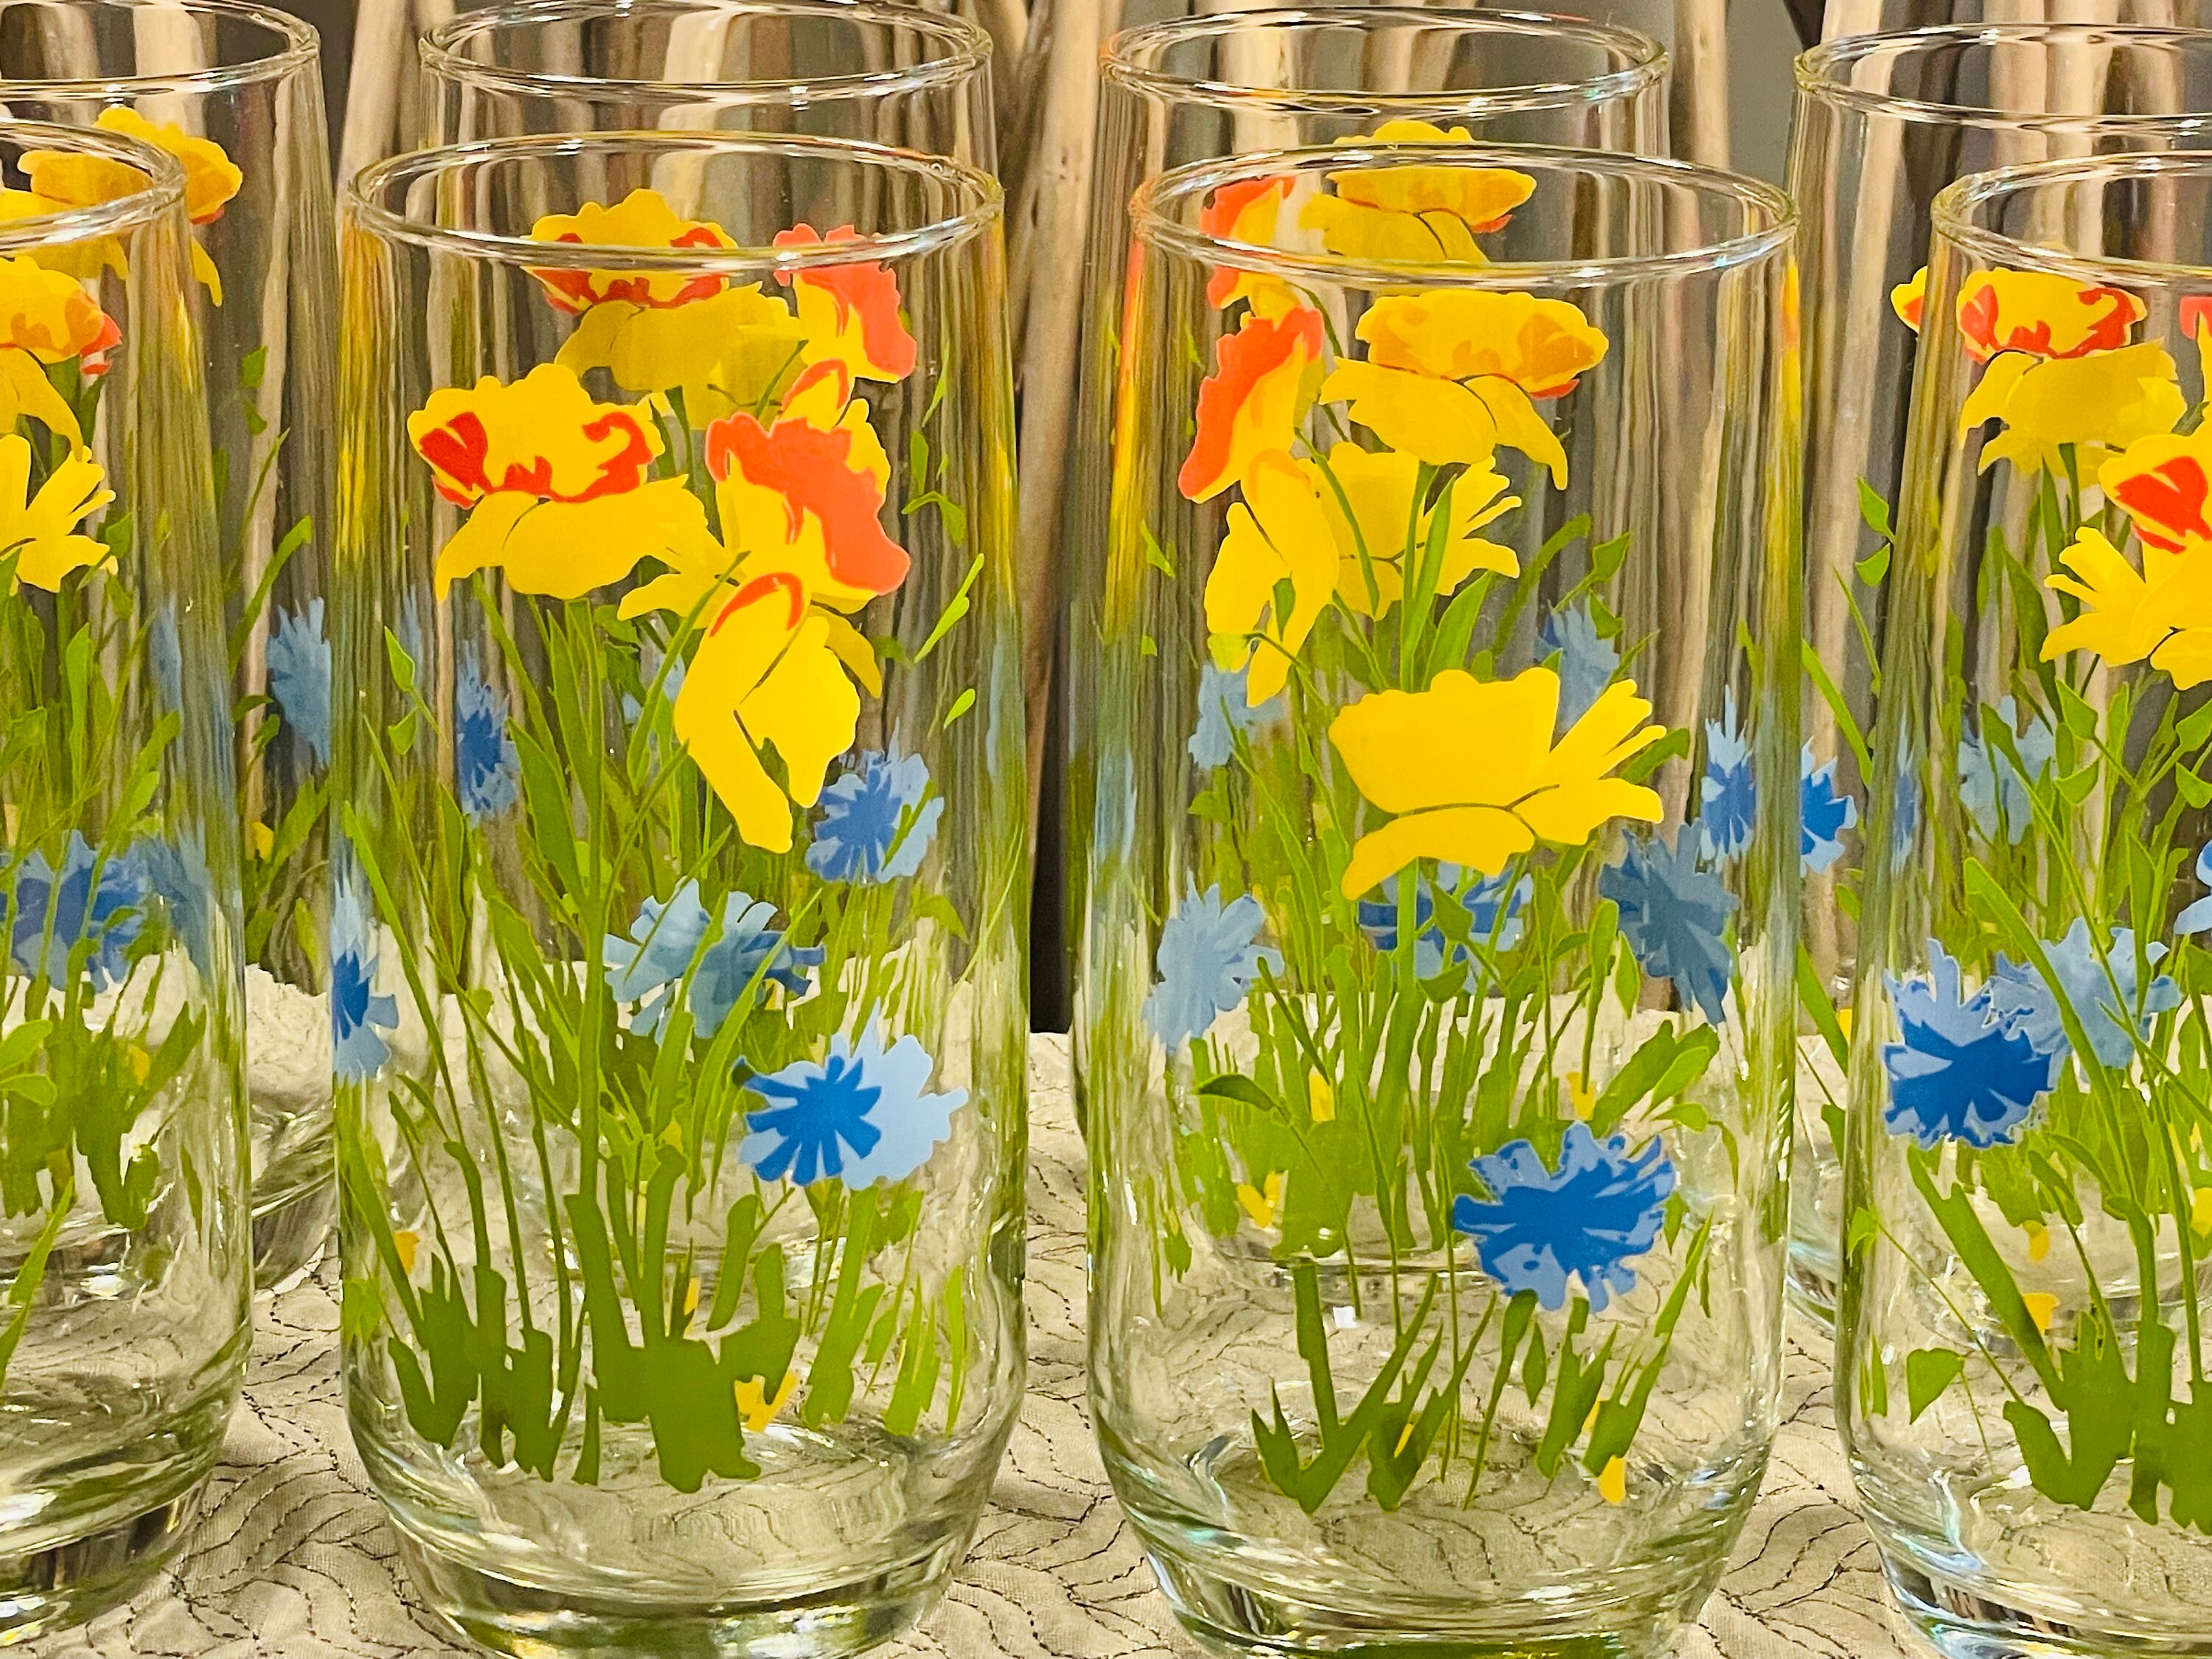 Glass Set by Libby Set of 8 Flowered Orange & Yellow 